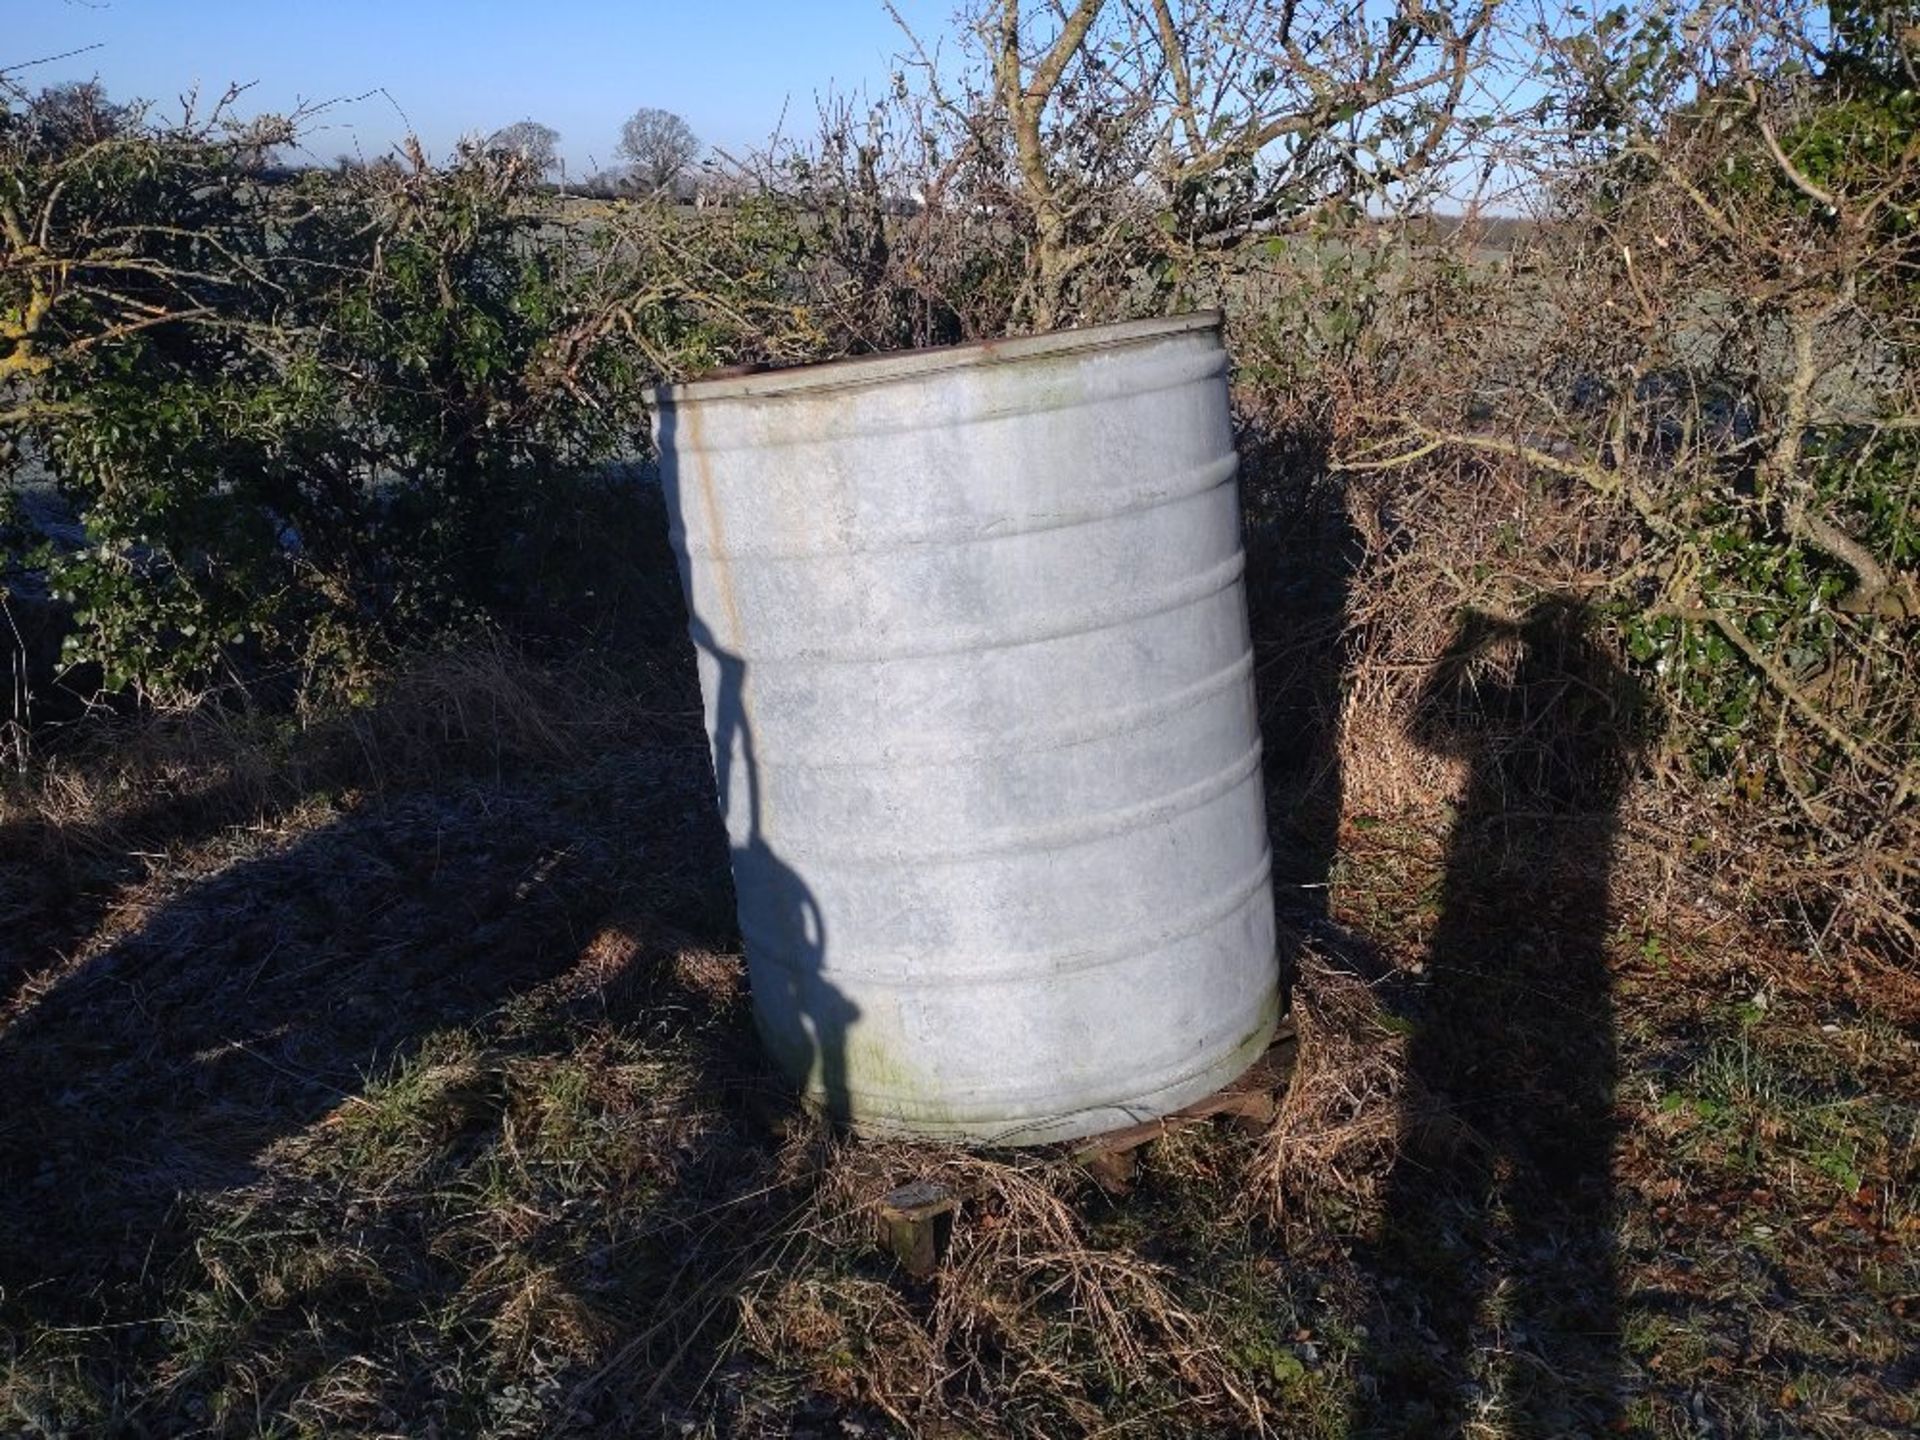 Galvanised tank with tap